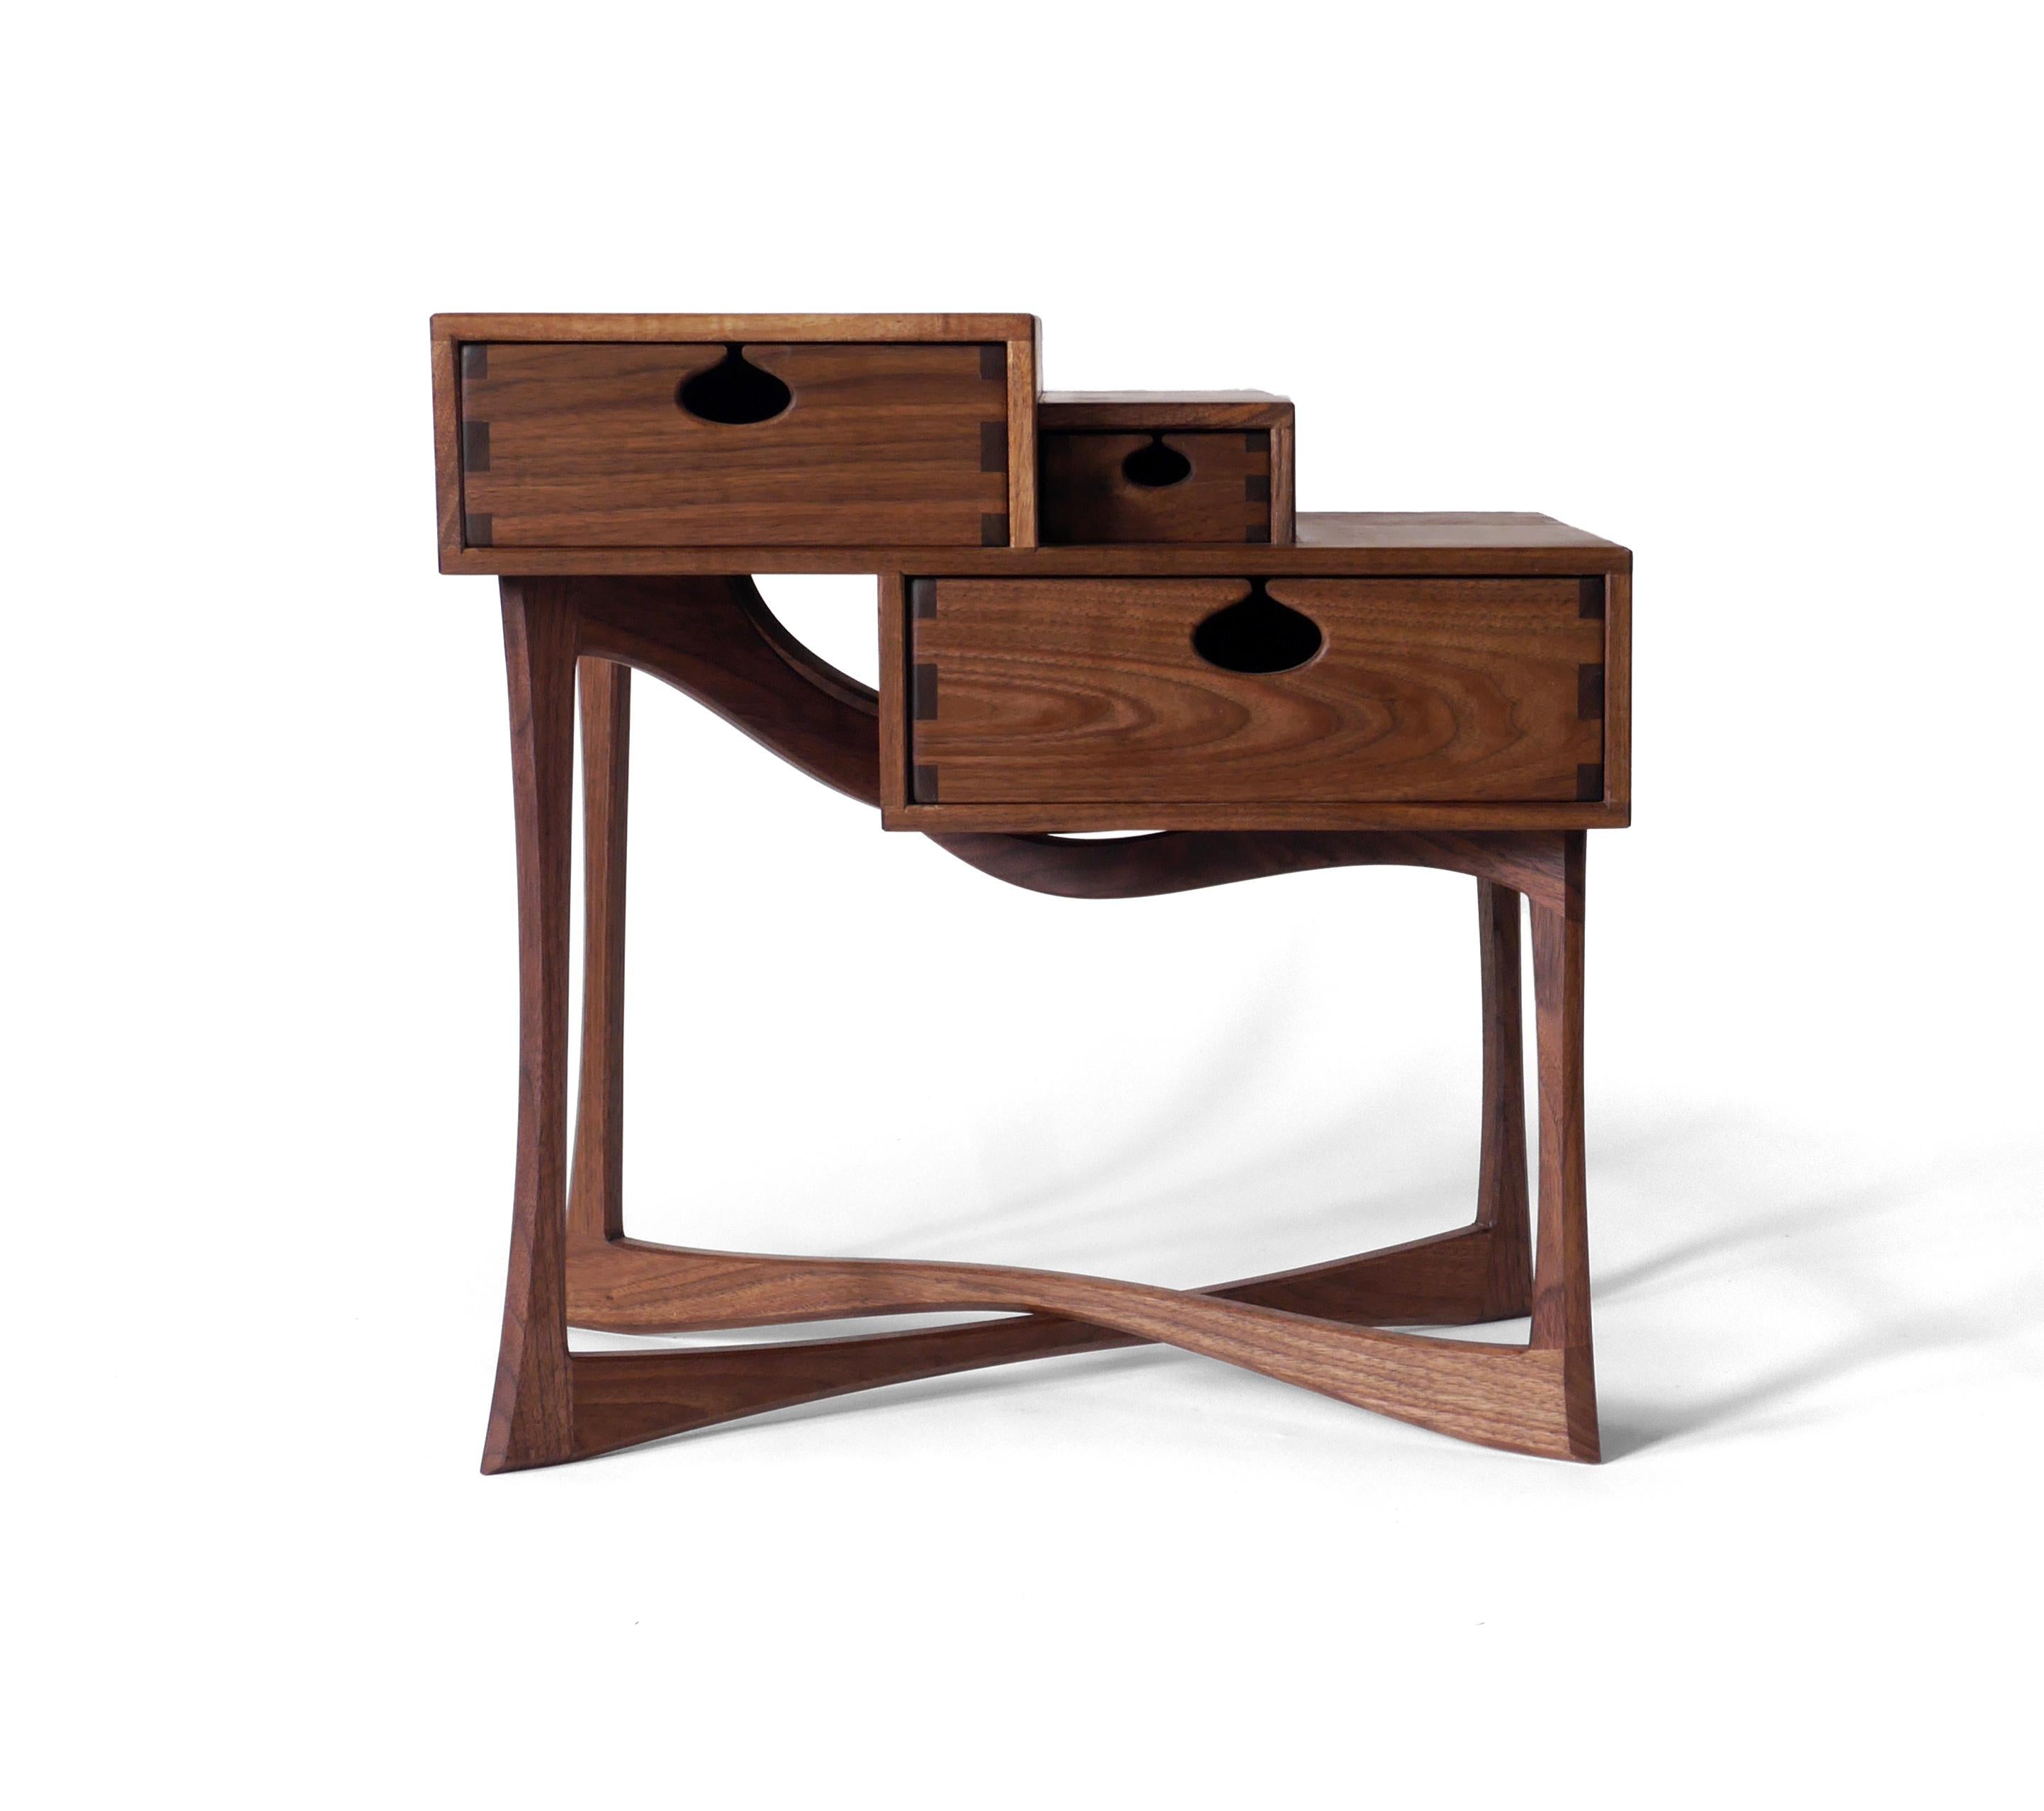 The charismatic Coriolis side table is made out of solid black walnut hardwood and has three drawers mounted on wooden runners in traditional drawer boxes. It’s built with exposed joinery that has been carefully designed for beauty and strength.